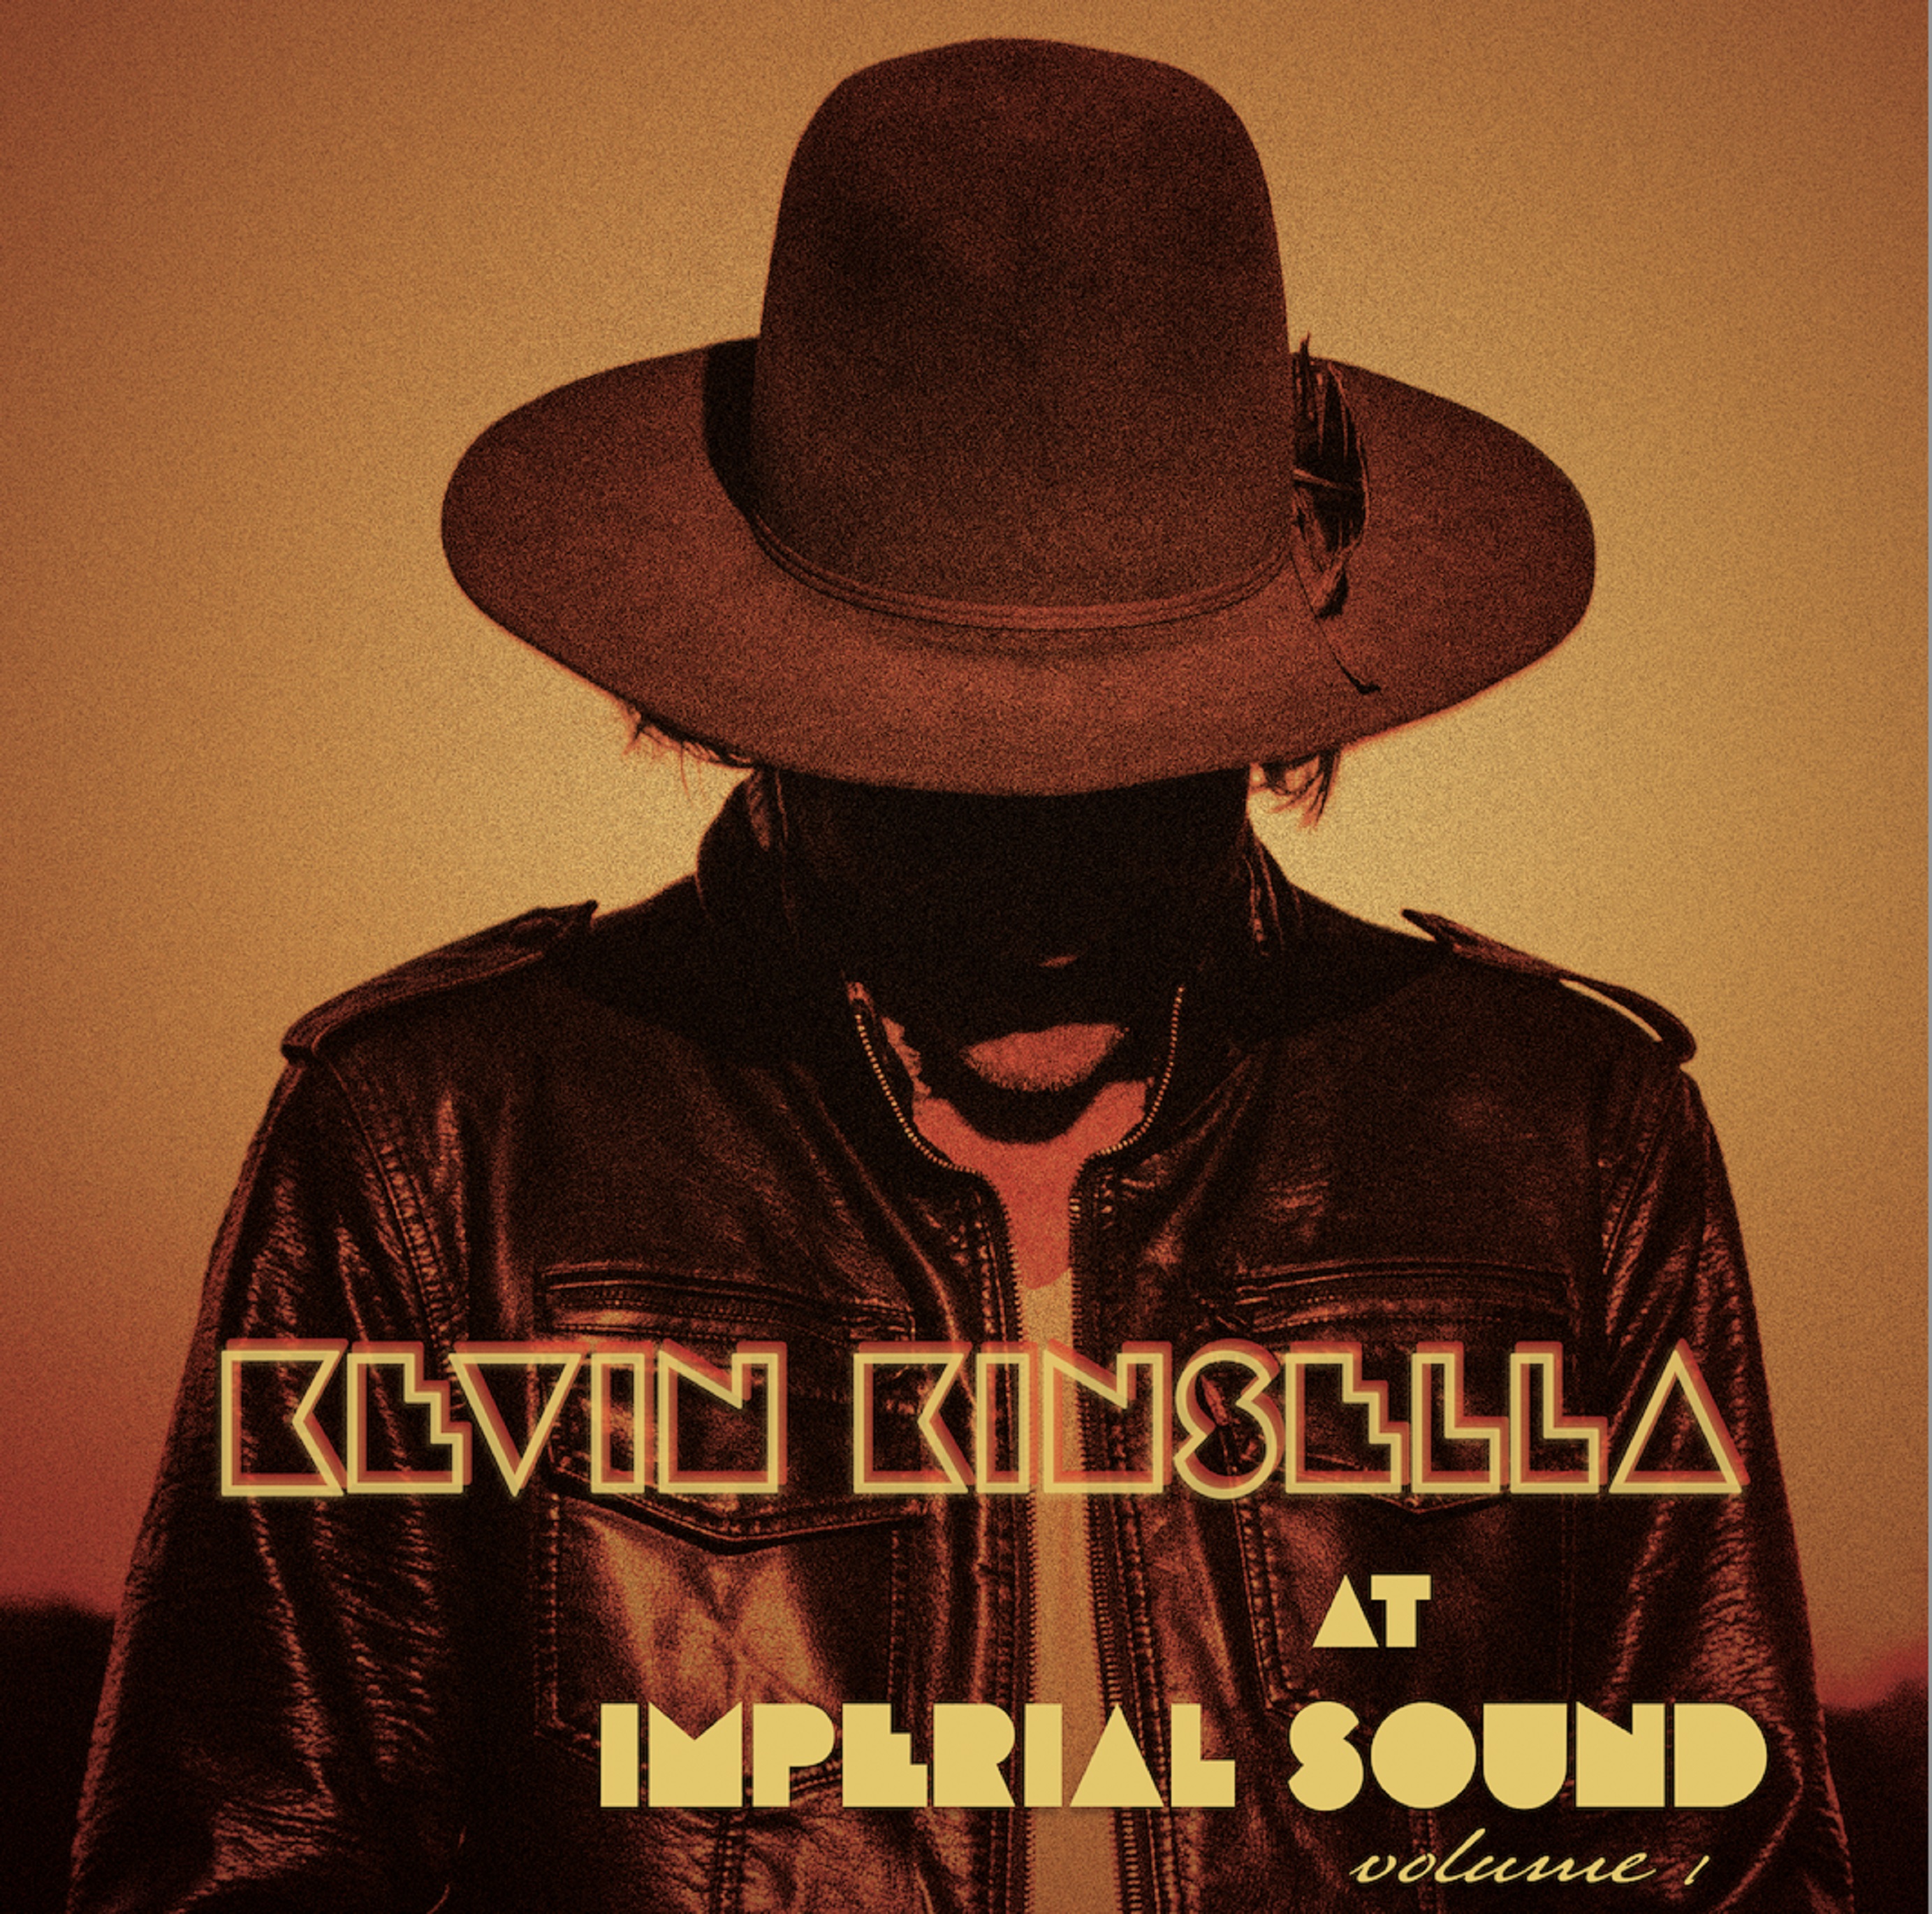 Kevin Kinsella Announces New Album ‘At Imperial Sound, Volume 1’